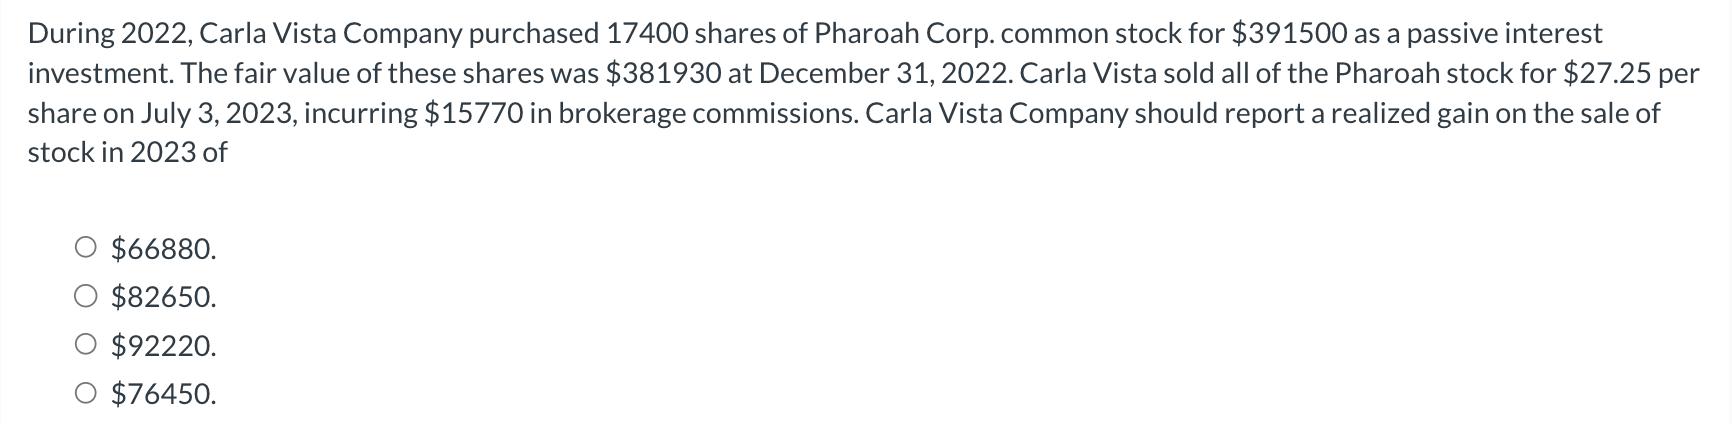 During 2022, Carla Vista Company purchased 17400 shares of Pharoah Corp. common stock for $391500 as a